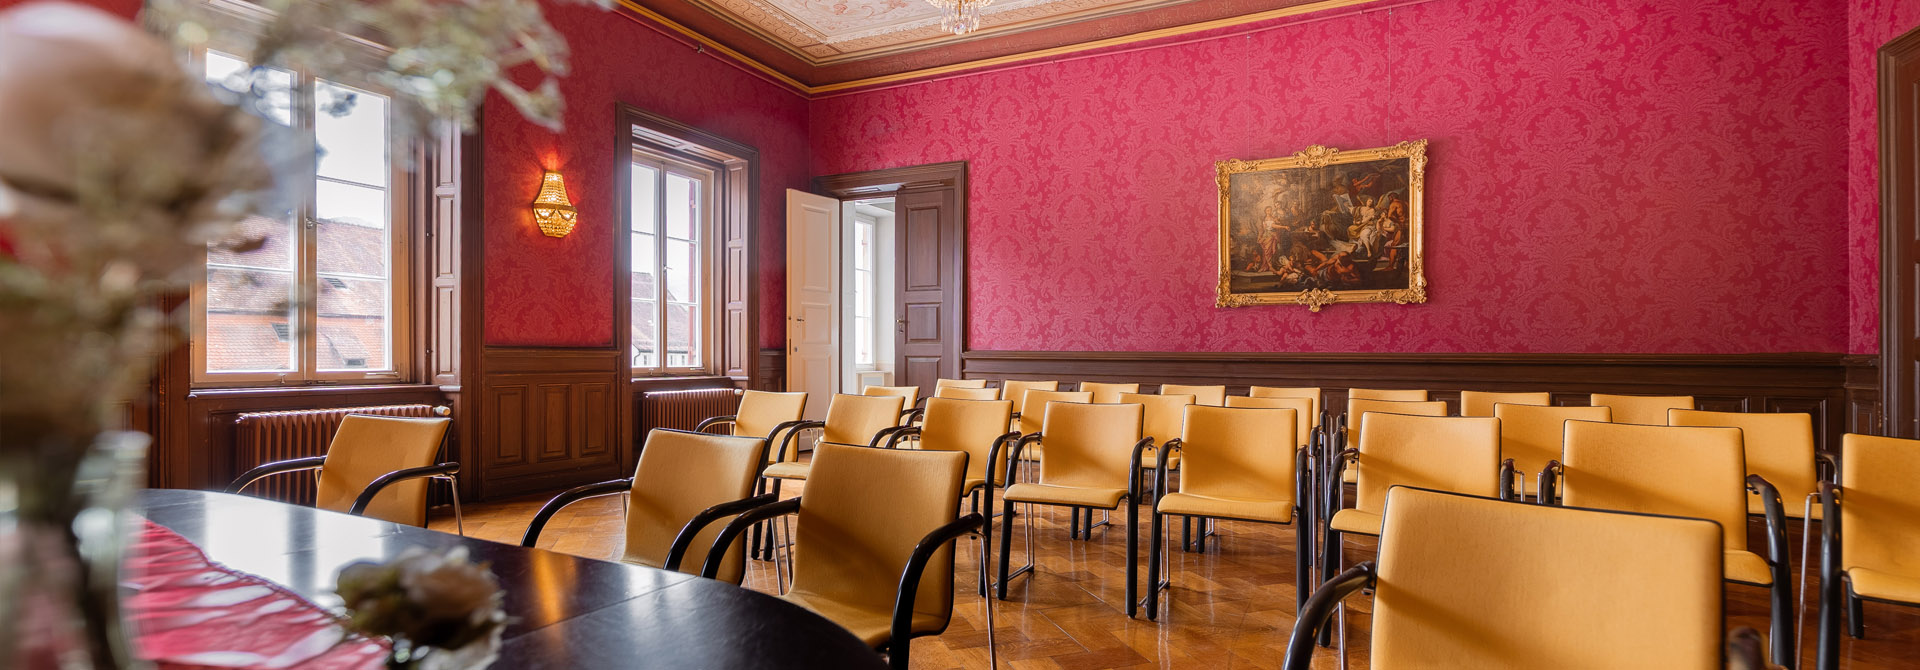 Roter Saal